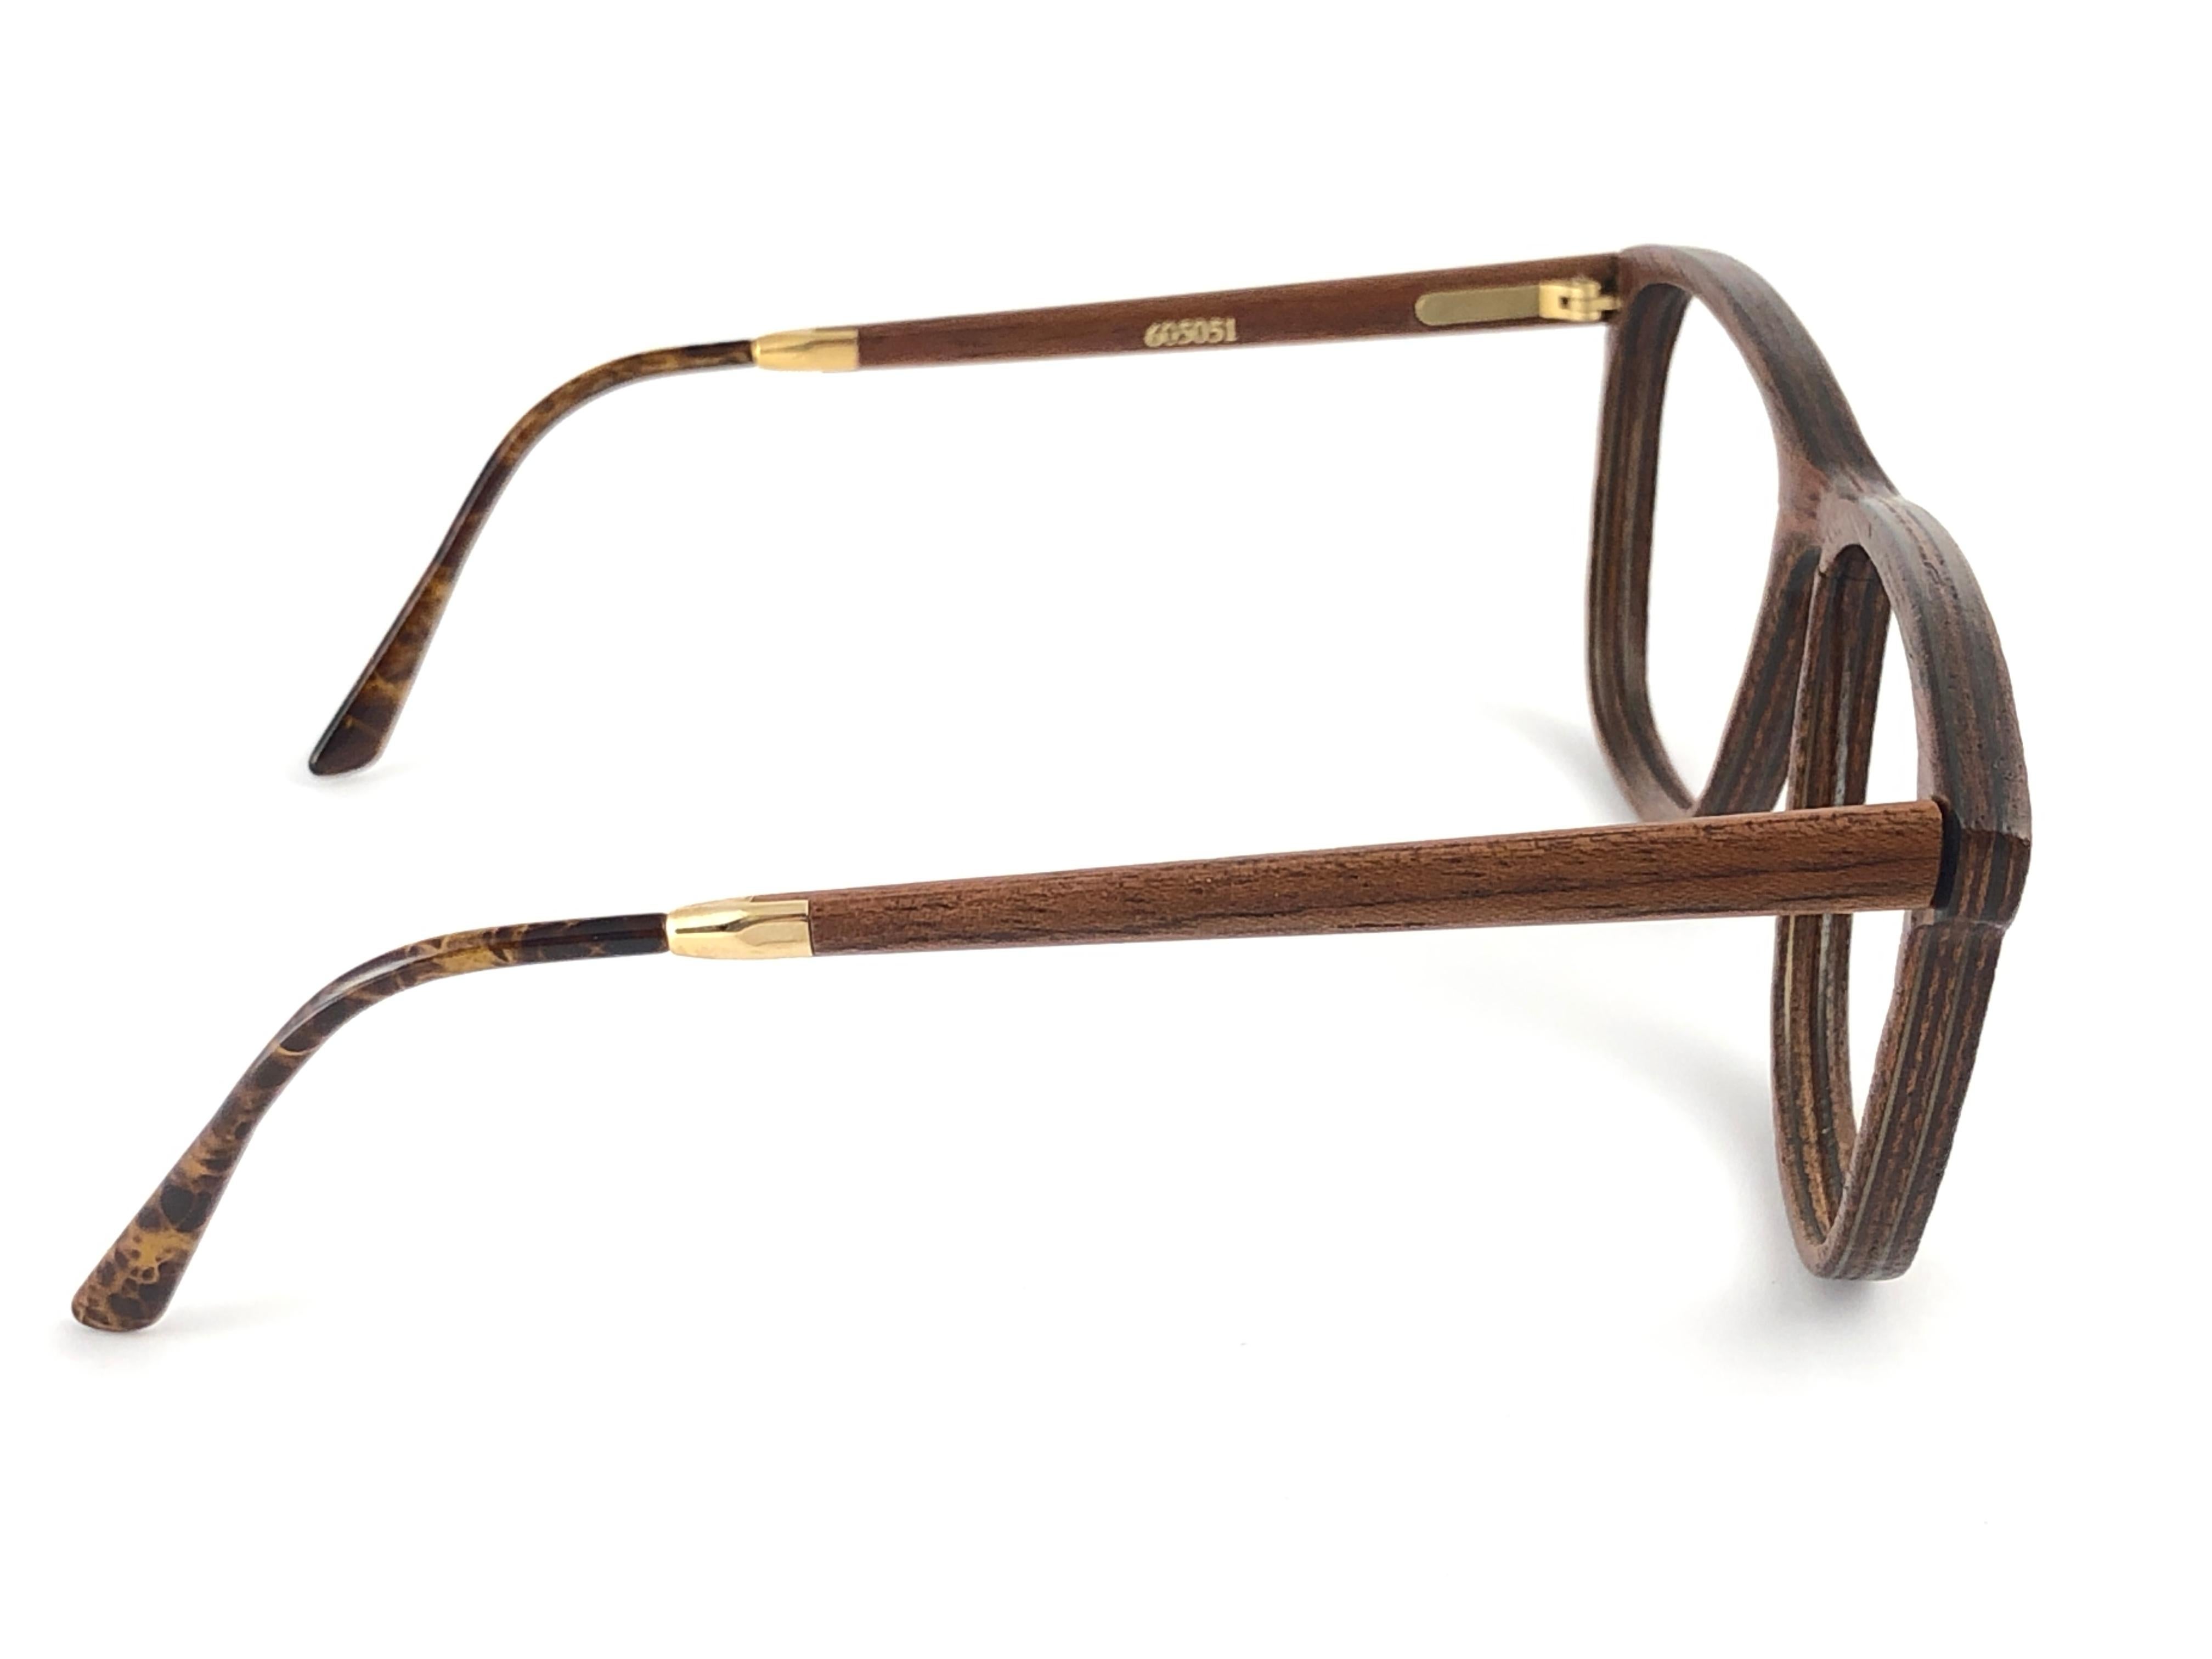 New Vintage Gold & Wood 605051 Genuine RX Glasses 1980's France In New Condition For Sale In Baleares, Baleares